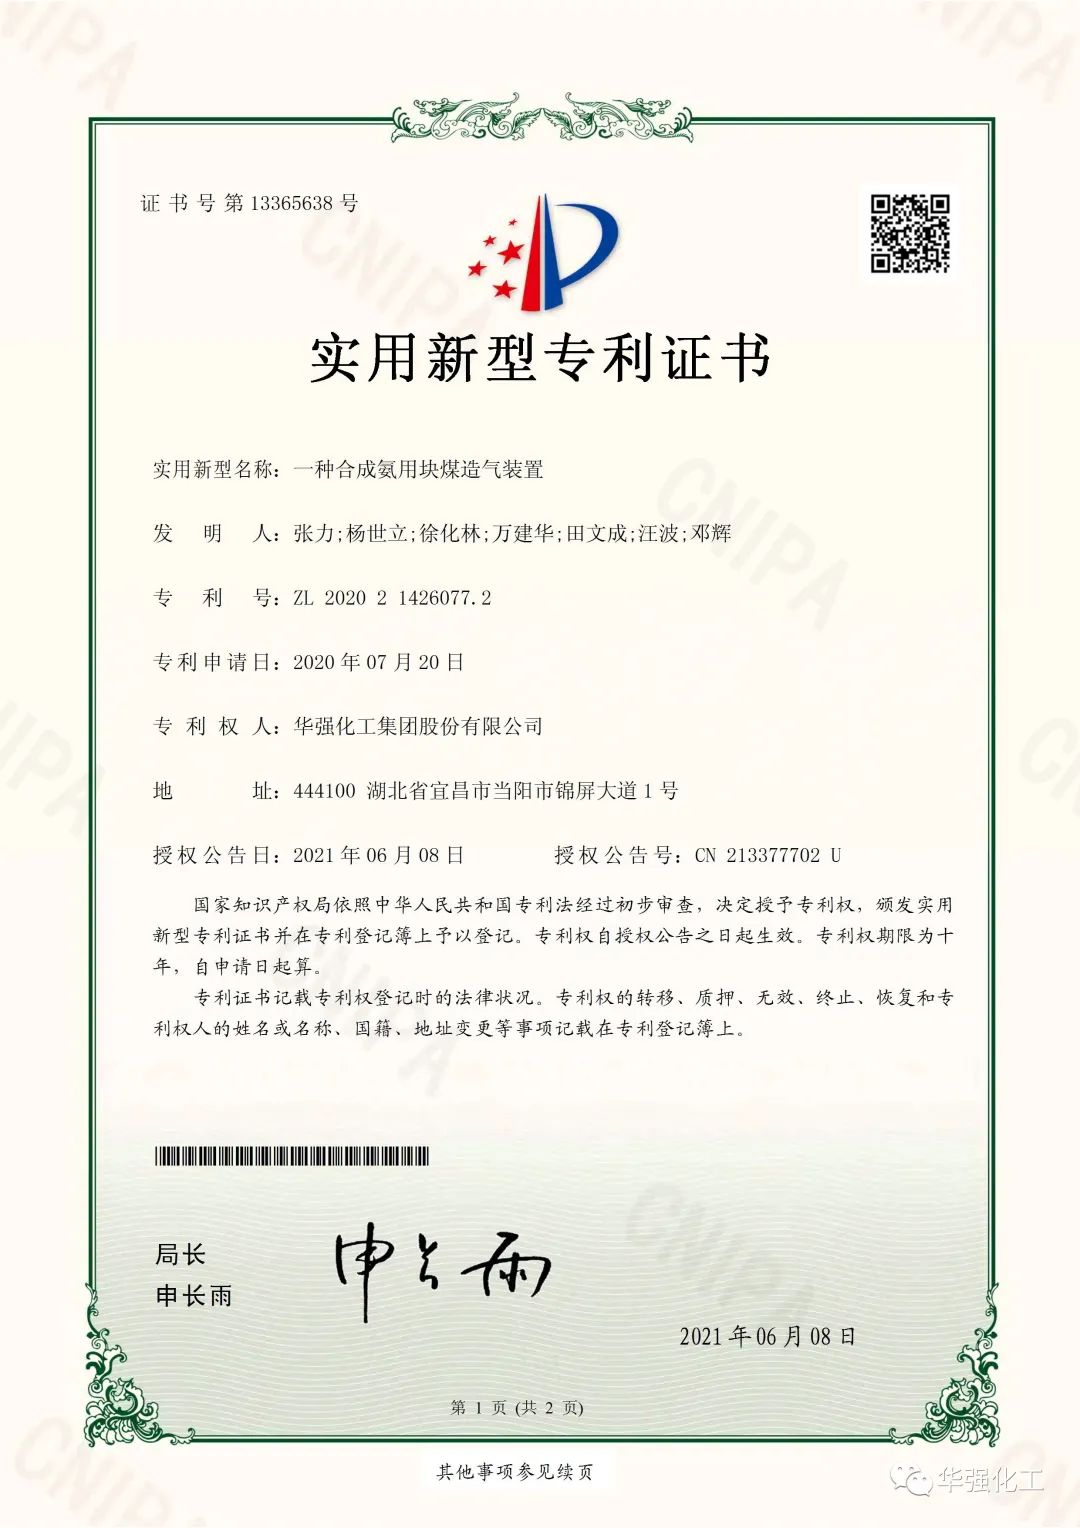 Our company has also obtained four national utility model patents